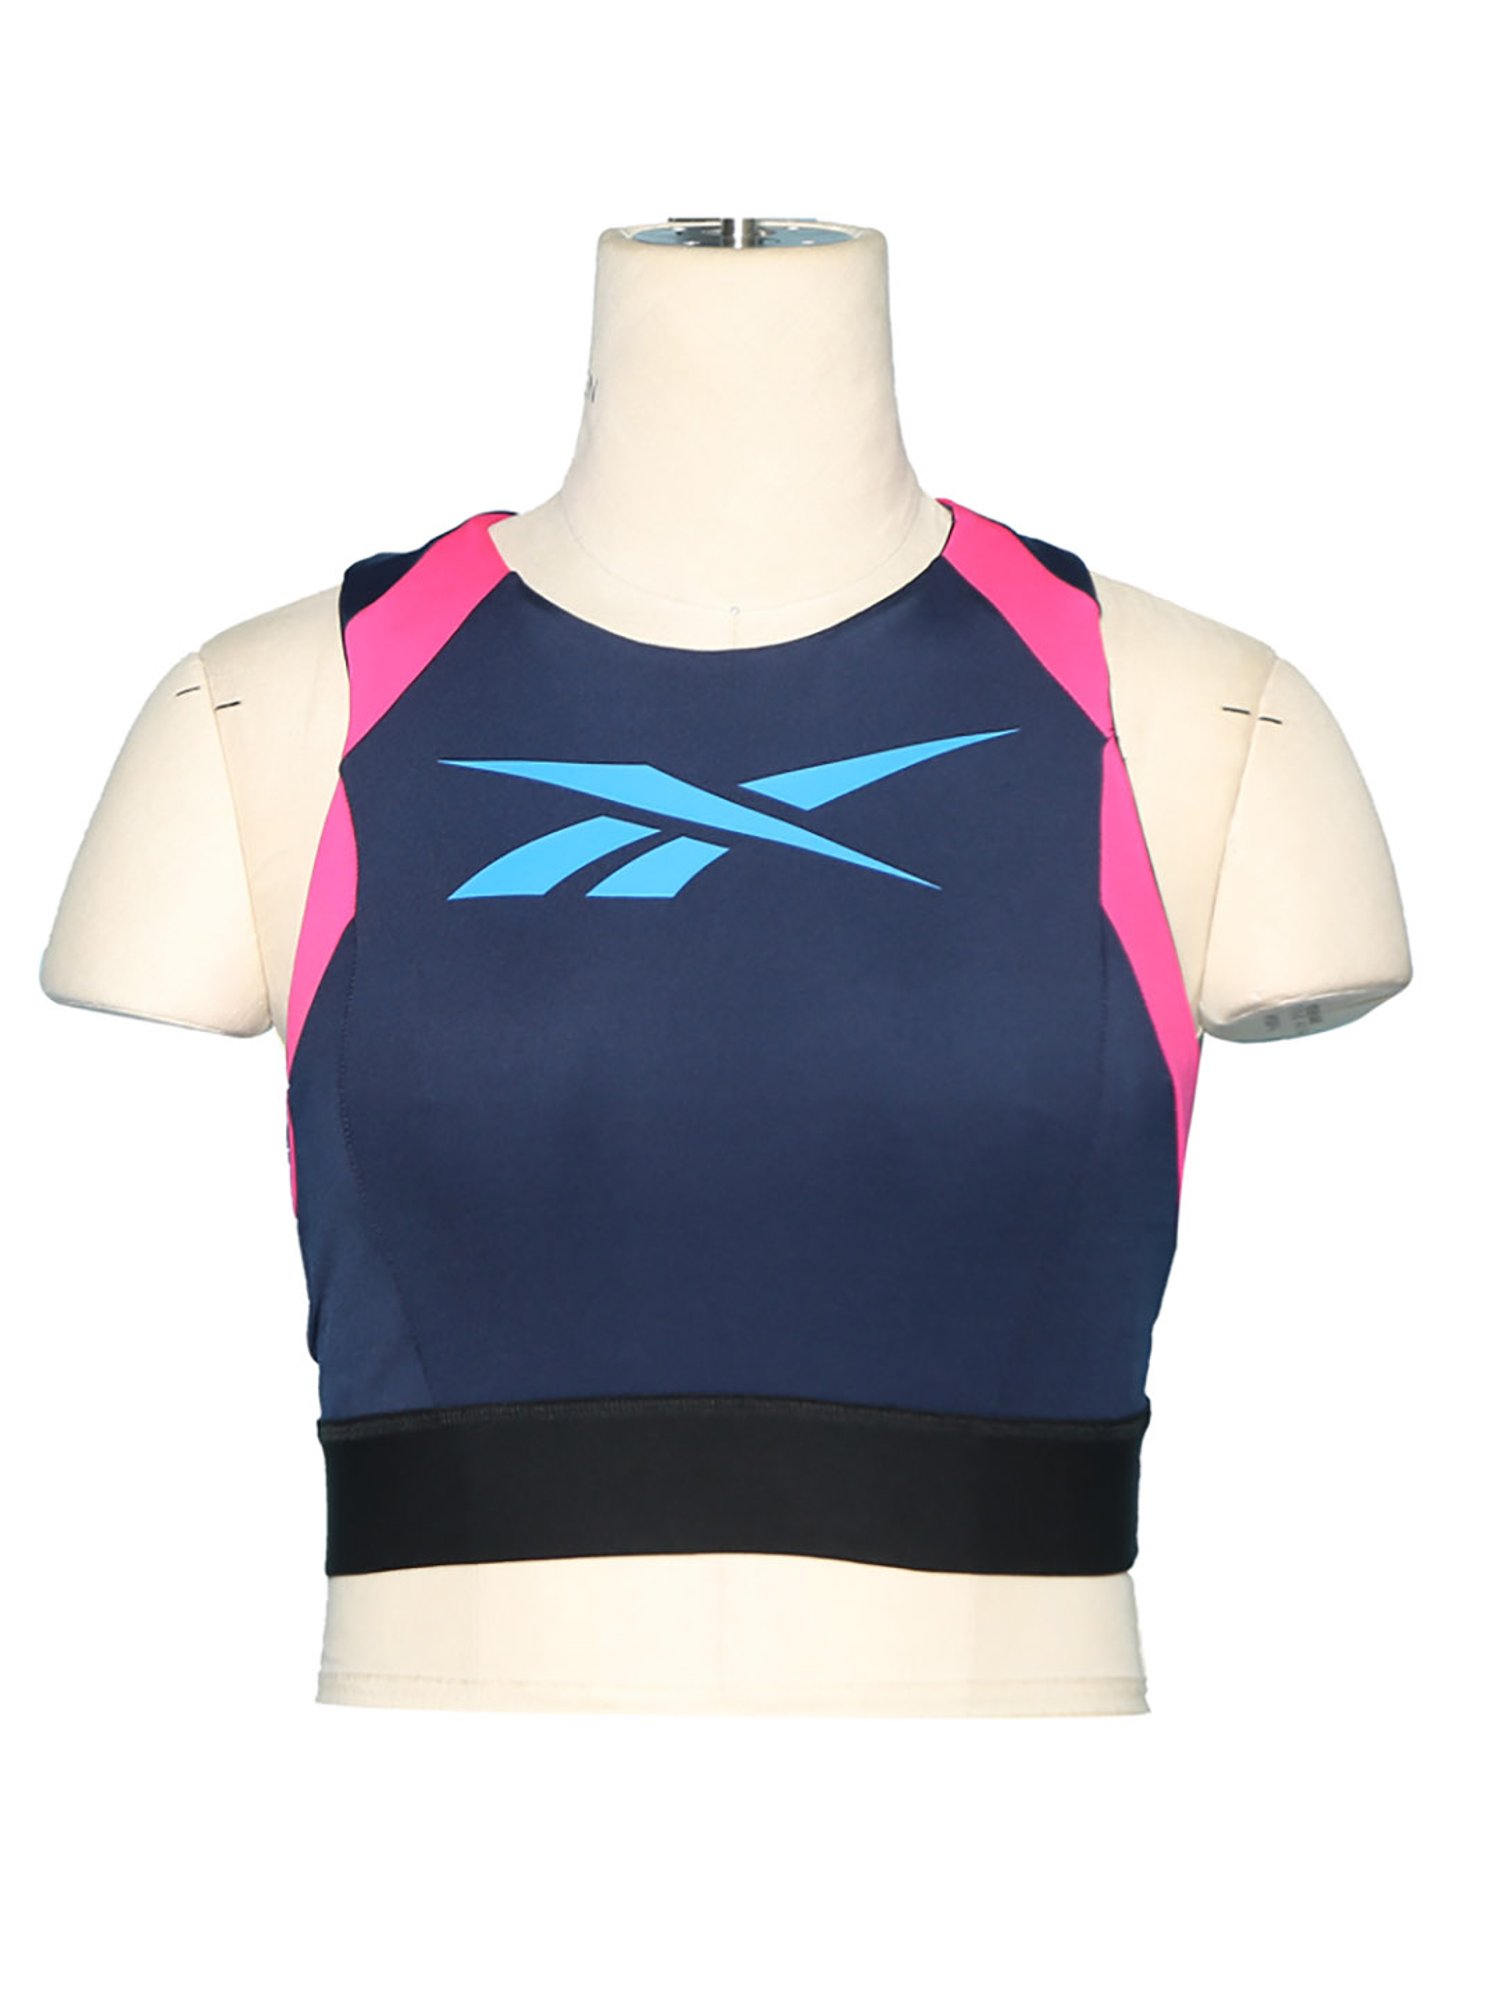 Printed Sports Bra with Full Coverage